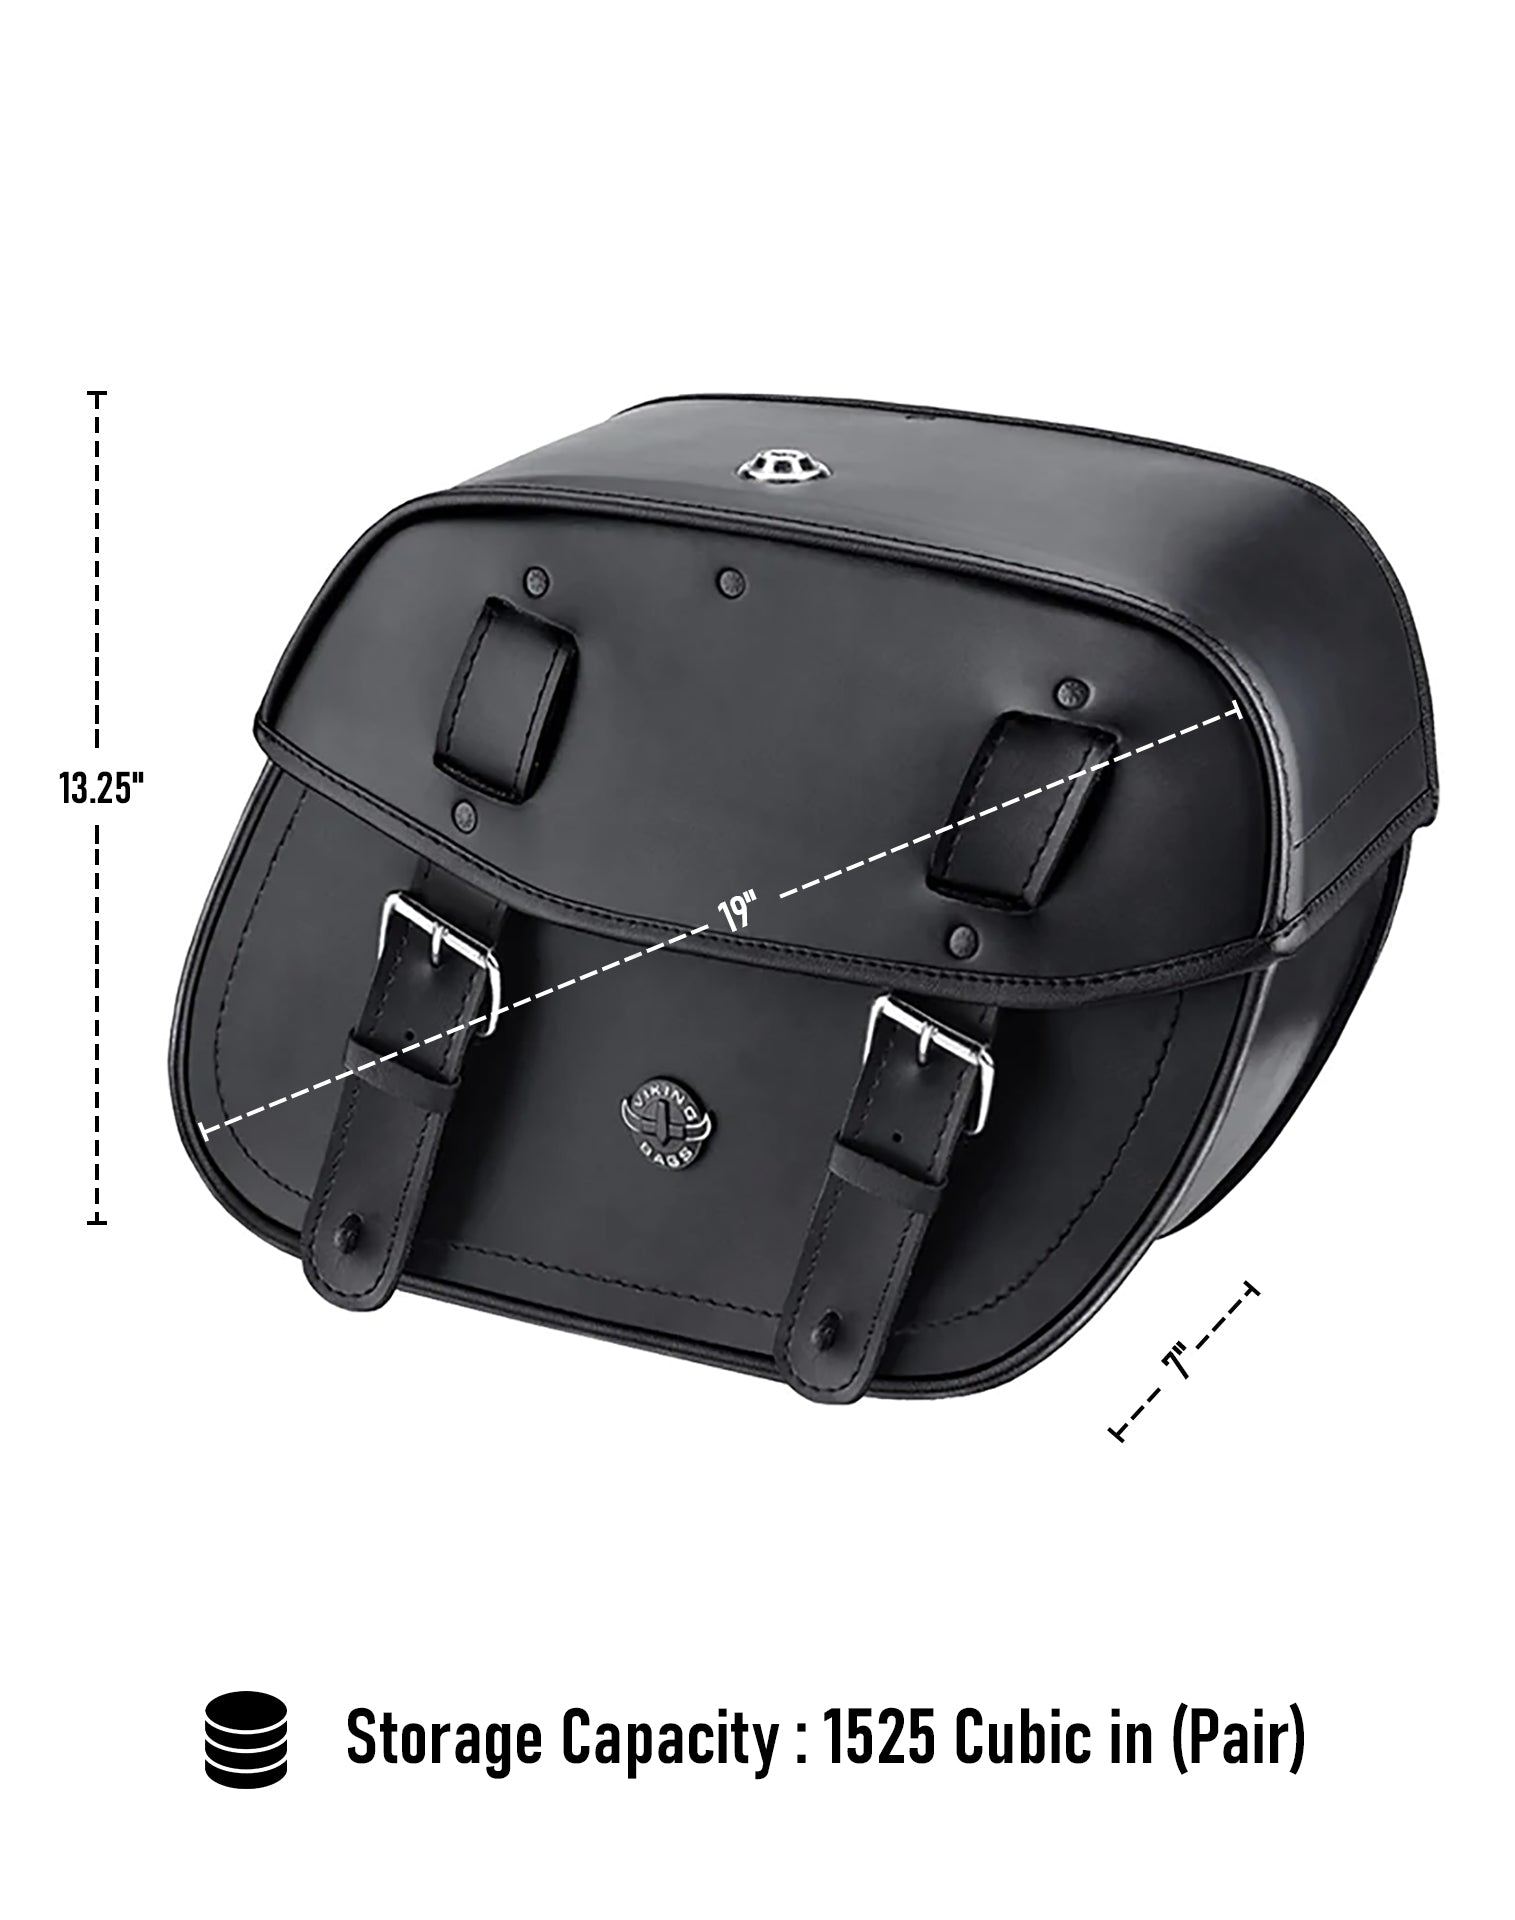 Viking Arch Large Shock Cutout Leather Motorcycle Saddlebags For Harley Sportster 883 Low Xl883L Can Store Your Ridings Gears